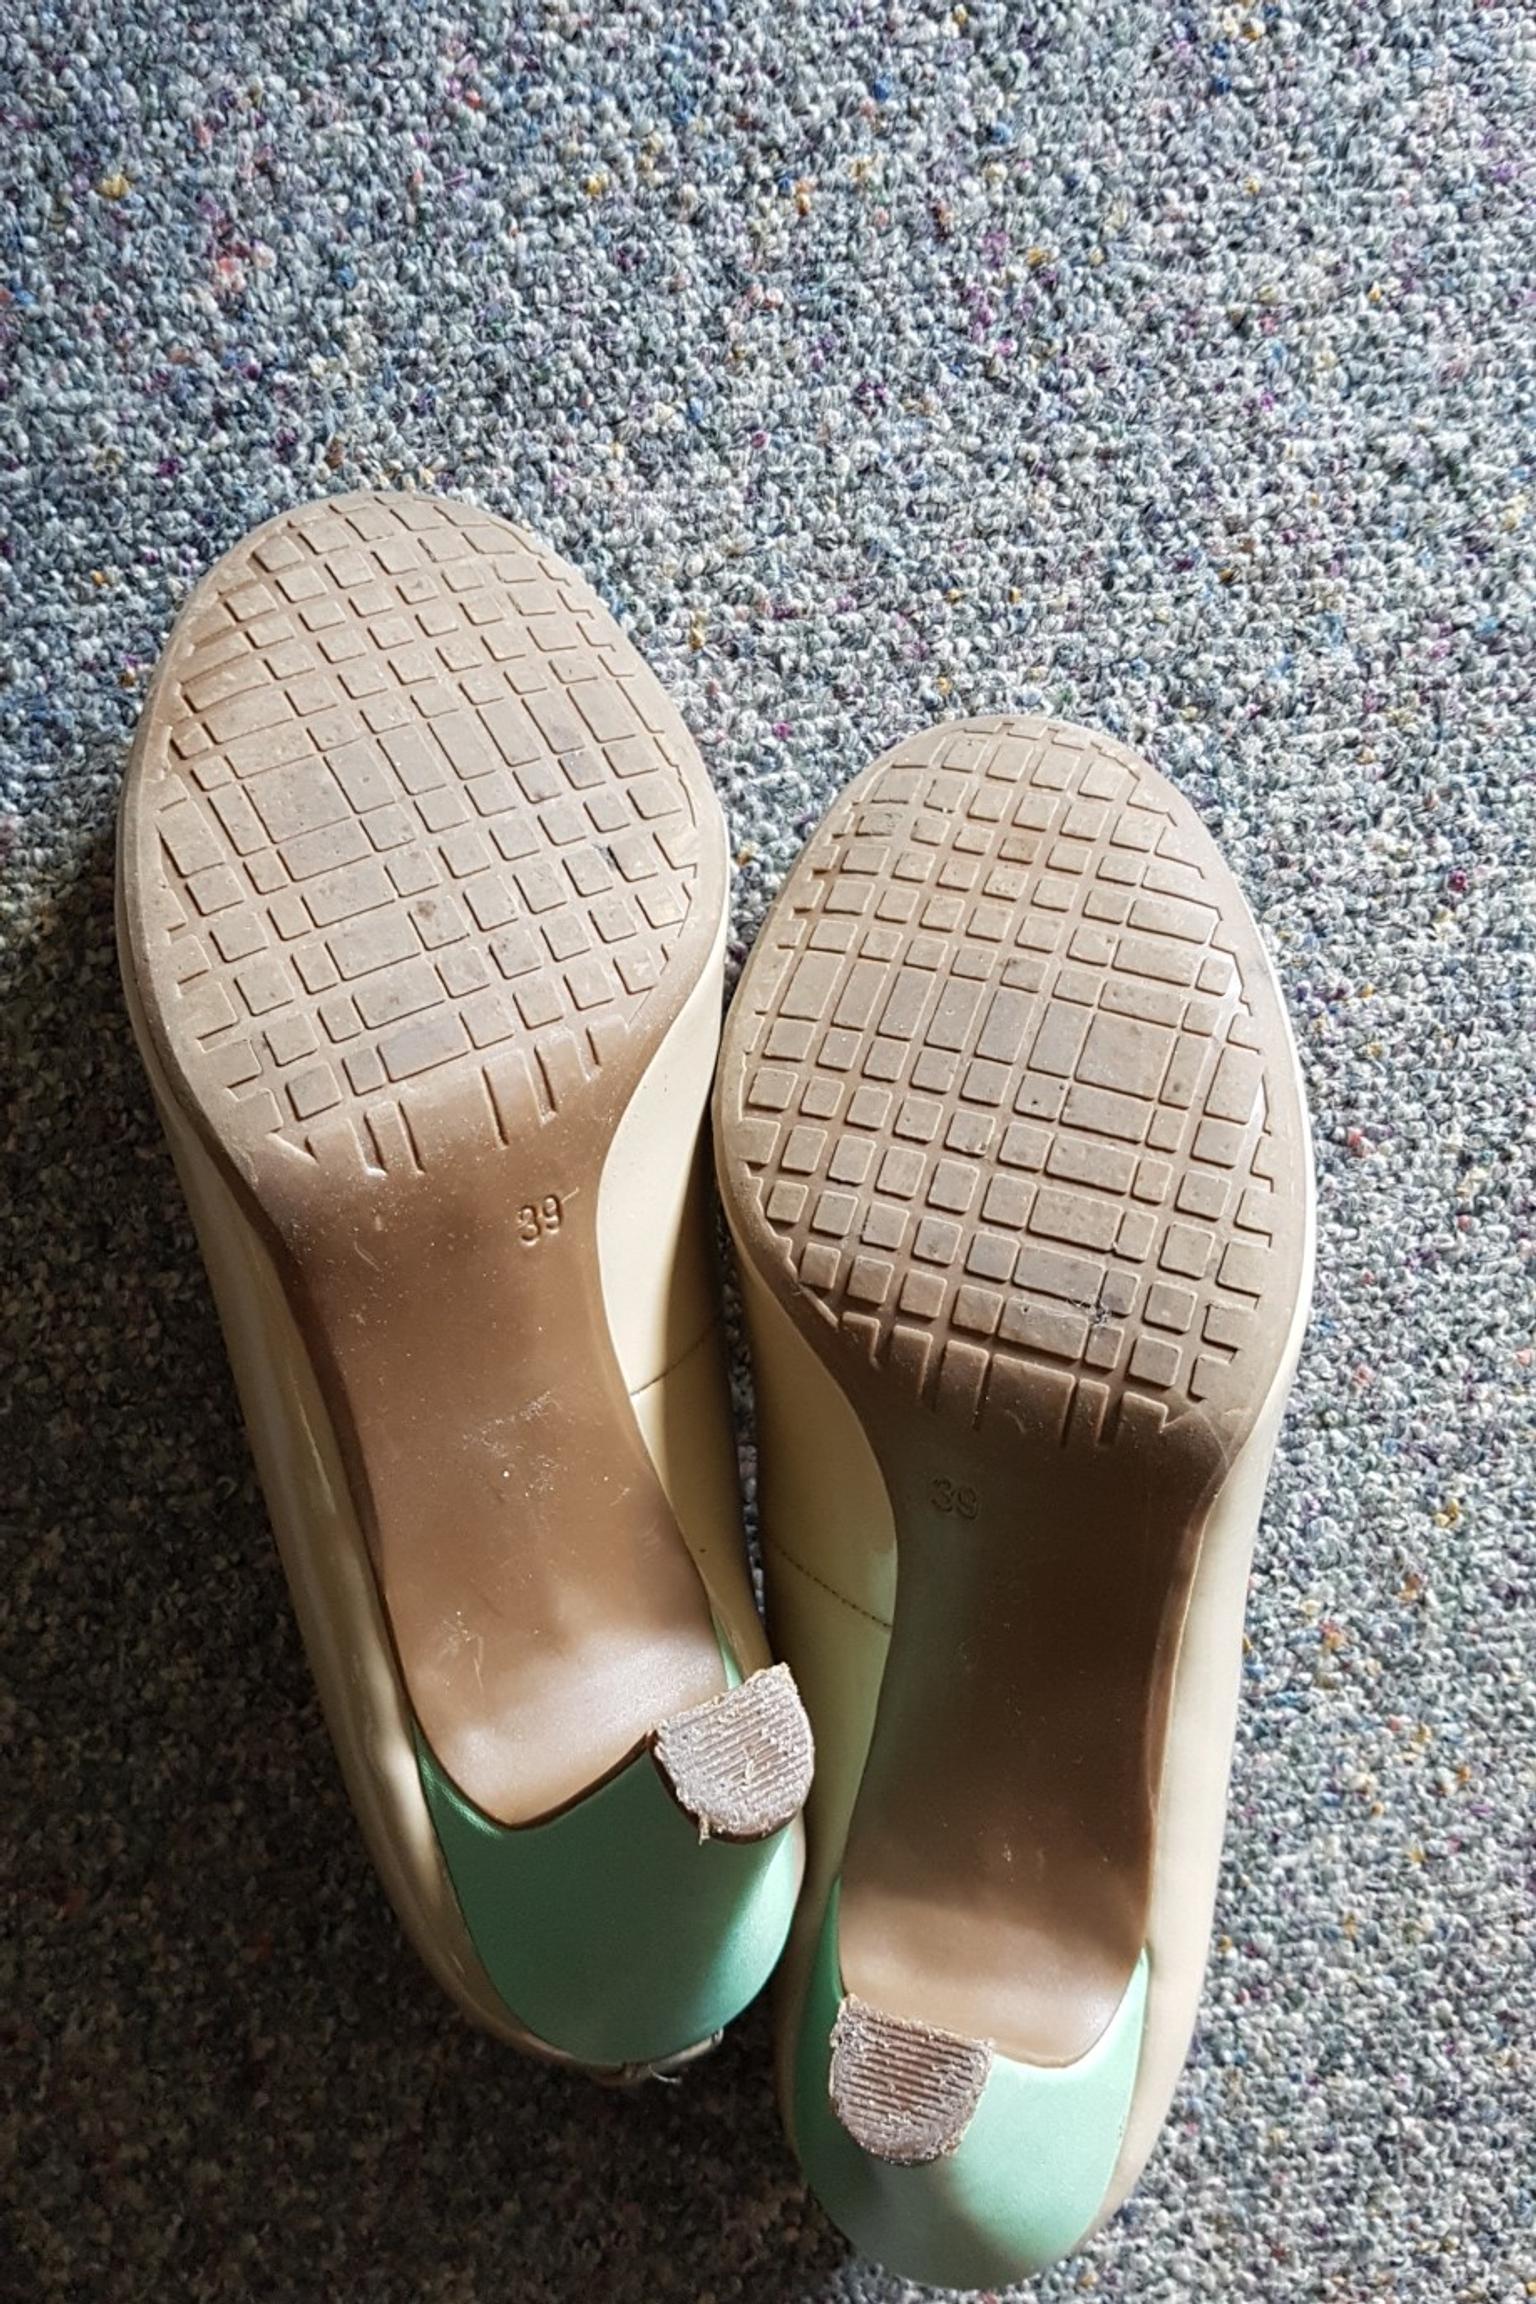 nude pumps in 56410 Montabaur for €12.00 for sale | Shpock